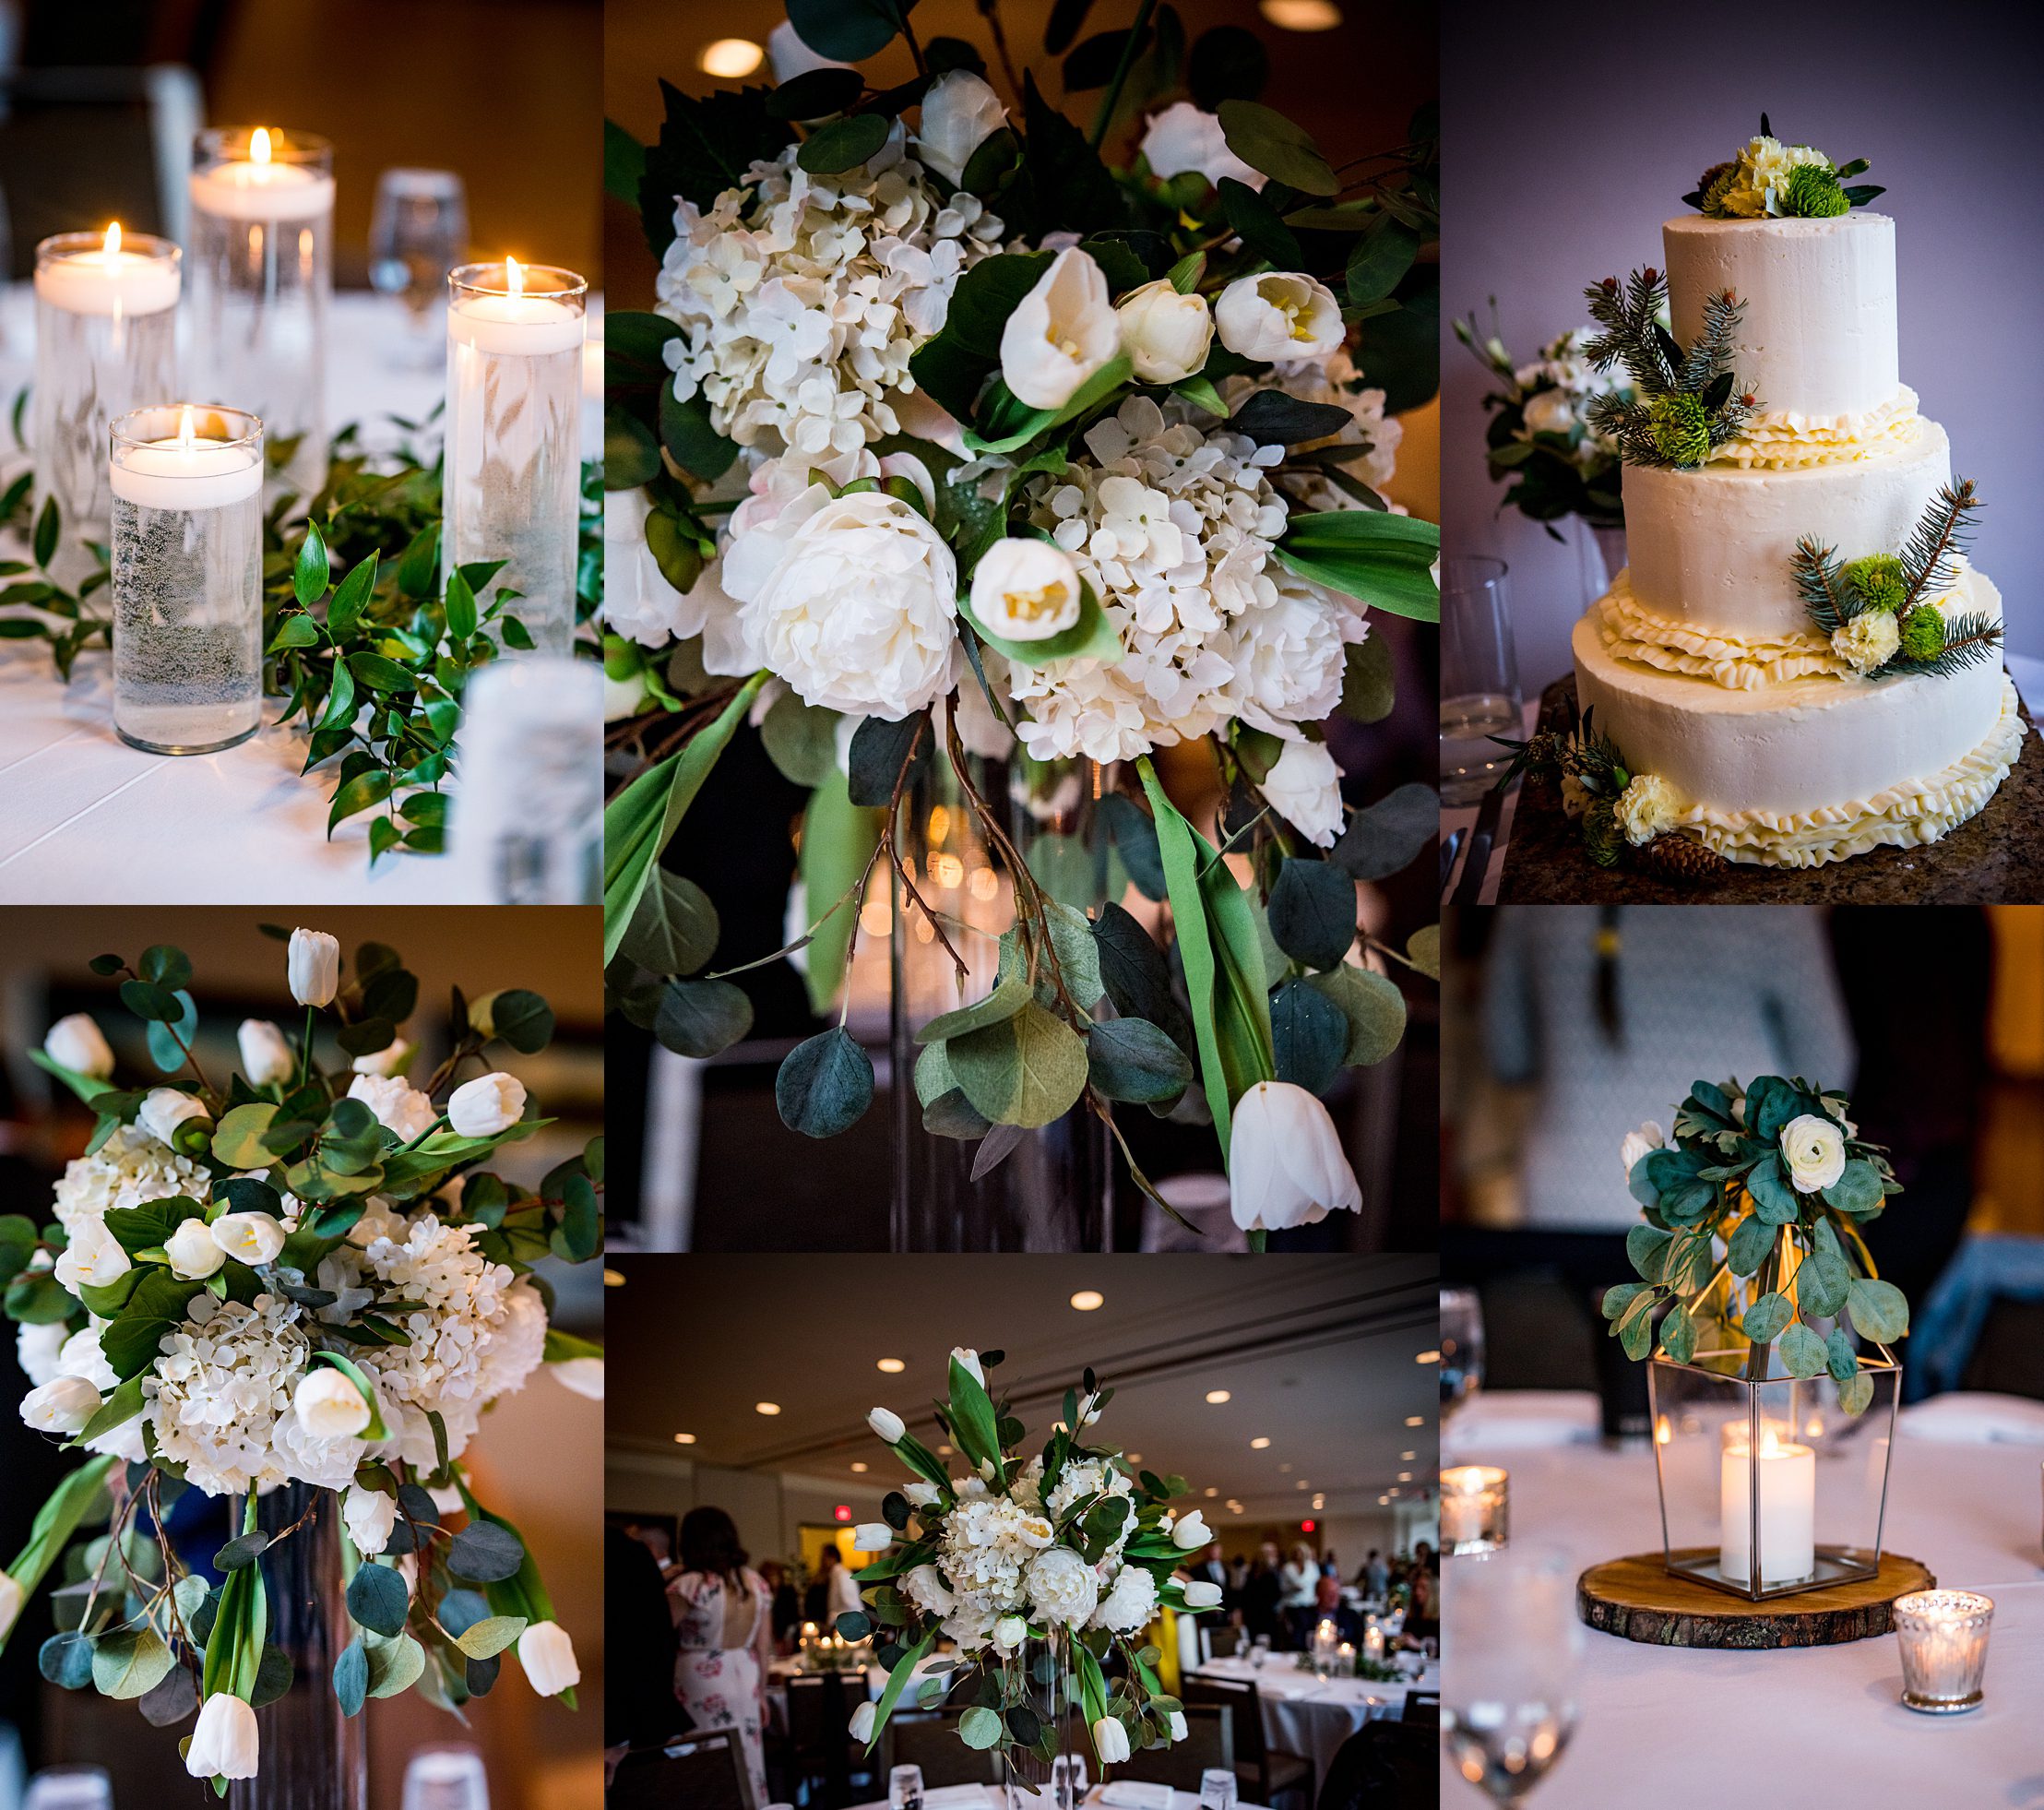 Wedding details  with white flowers and greenery